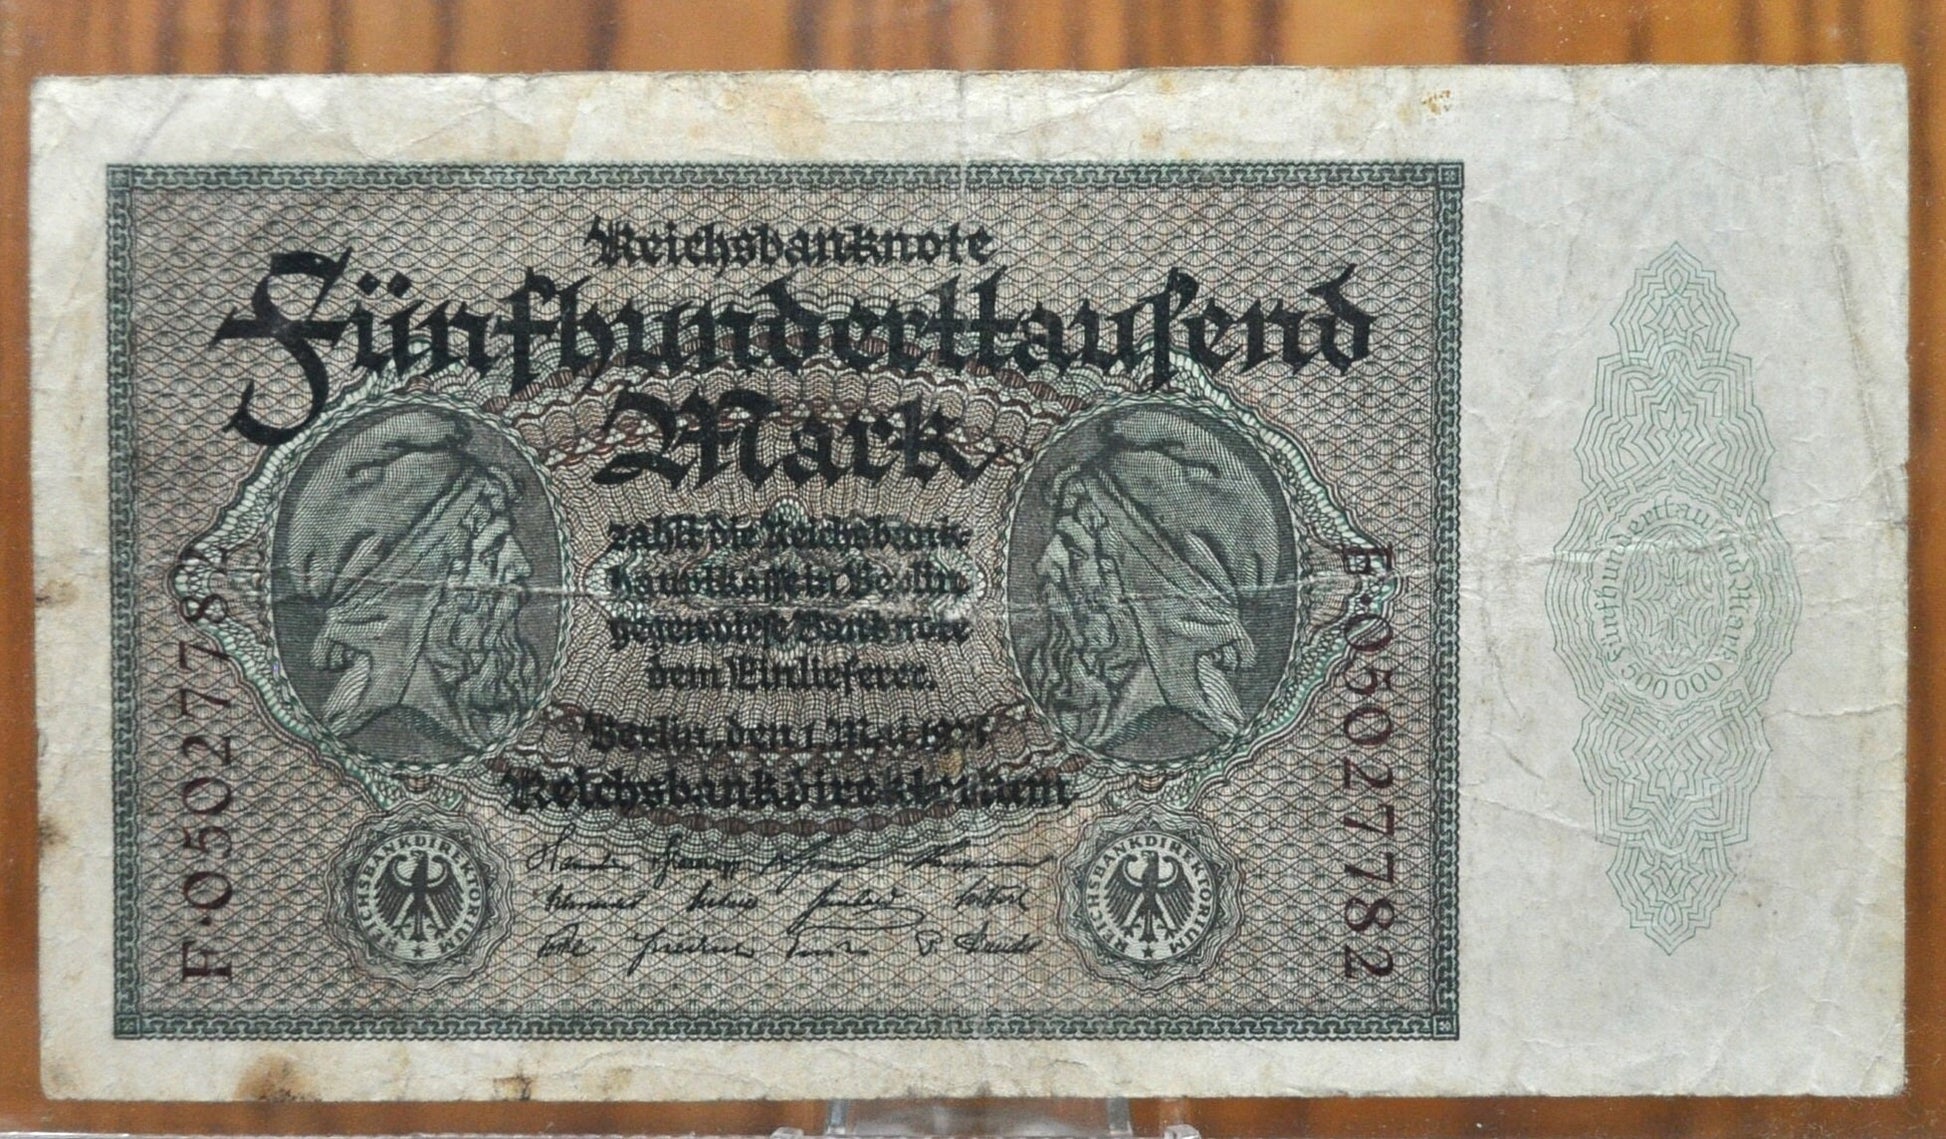 1923 500,000 Mark Weimar Republic German Paper Reichsbanknote - Great Condition - WWI era note - Five Hundred Thousand Mark Note 1923